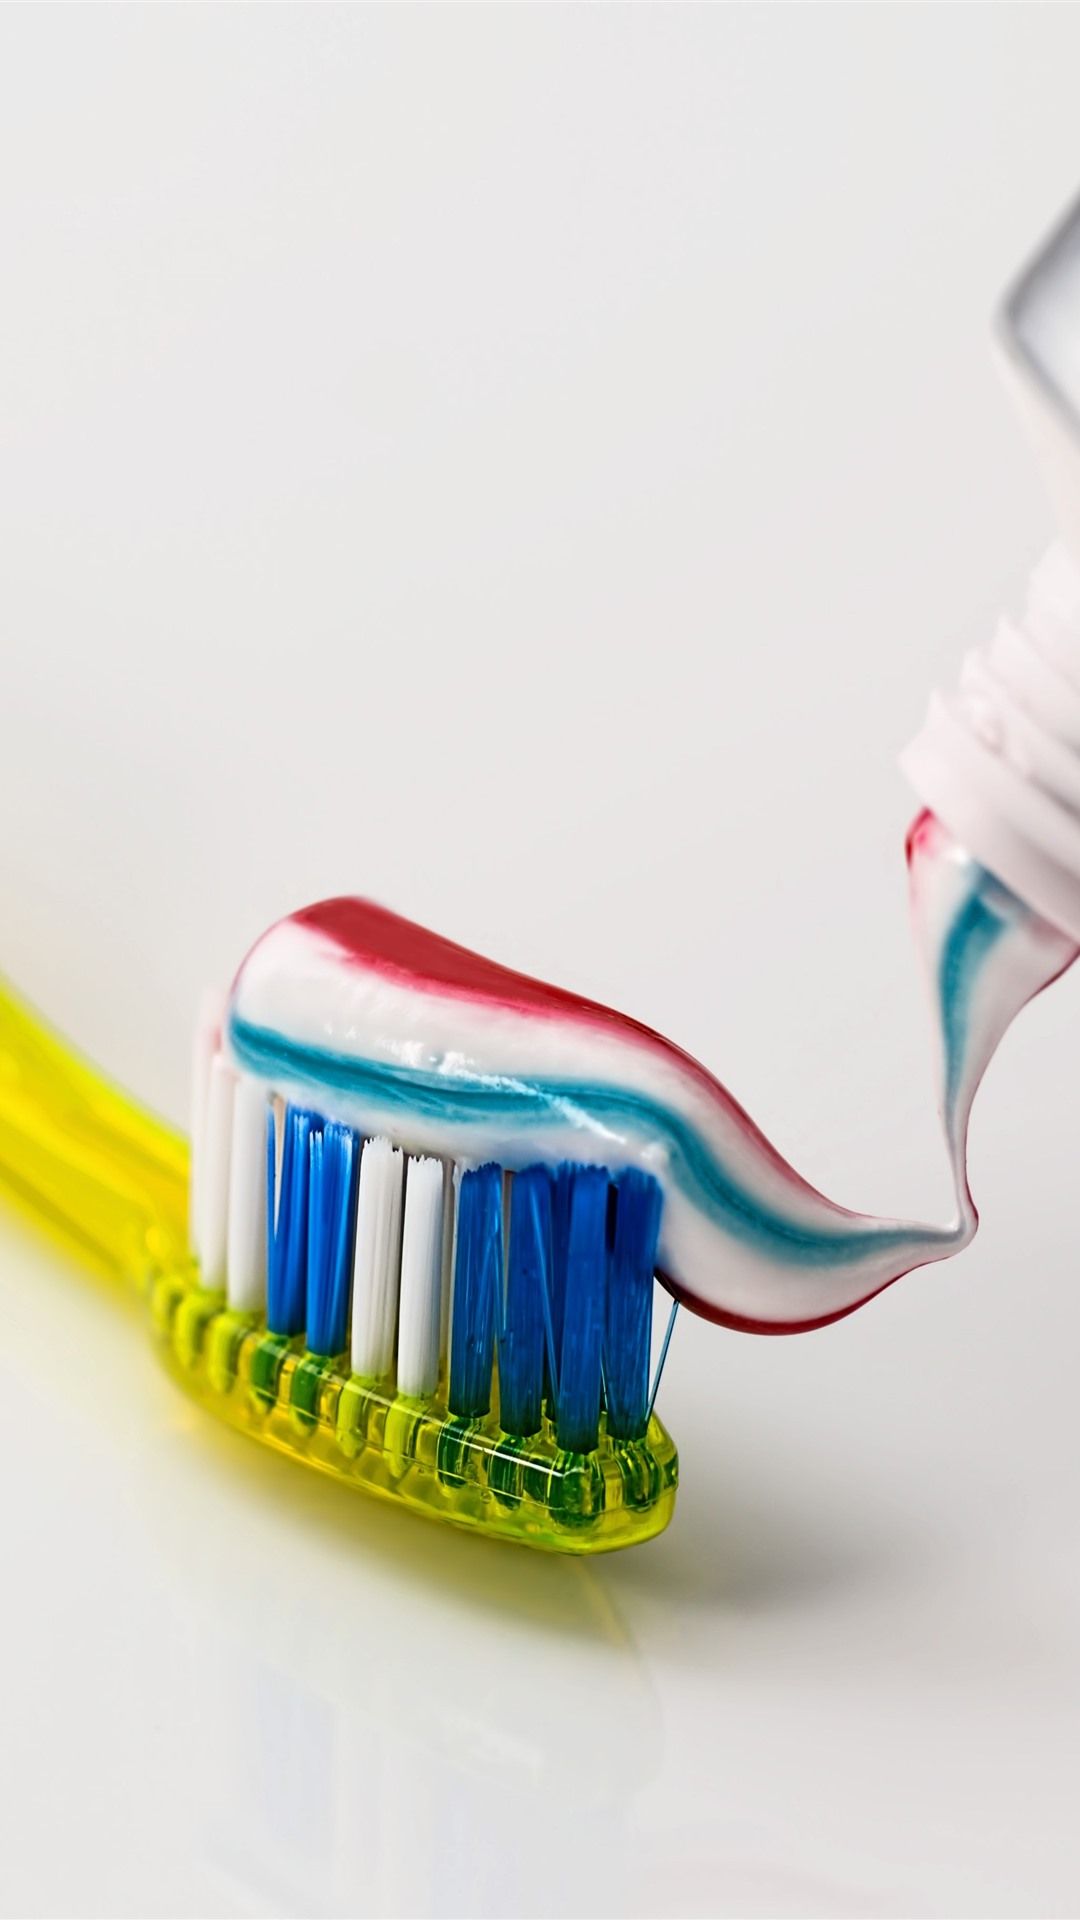 Wallpaper Toothbrush, colorful toothpaste 5120x2880 UHD 5K Picture, Image